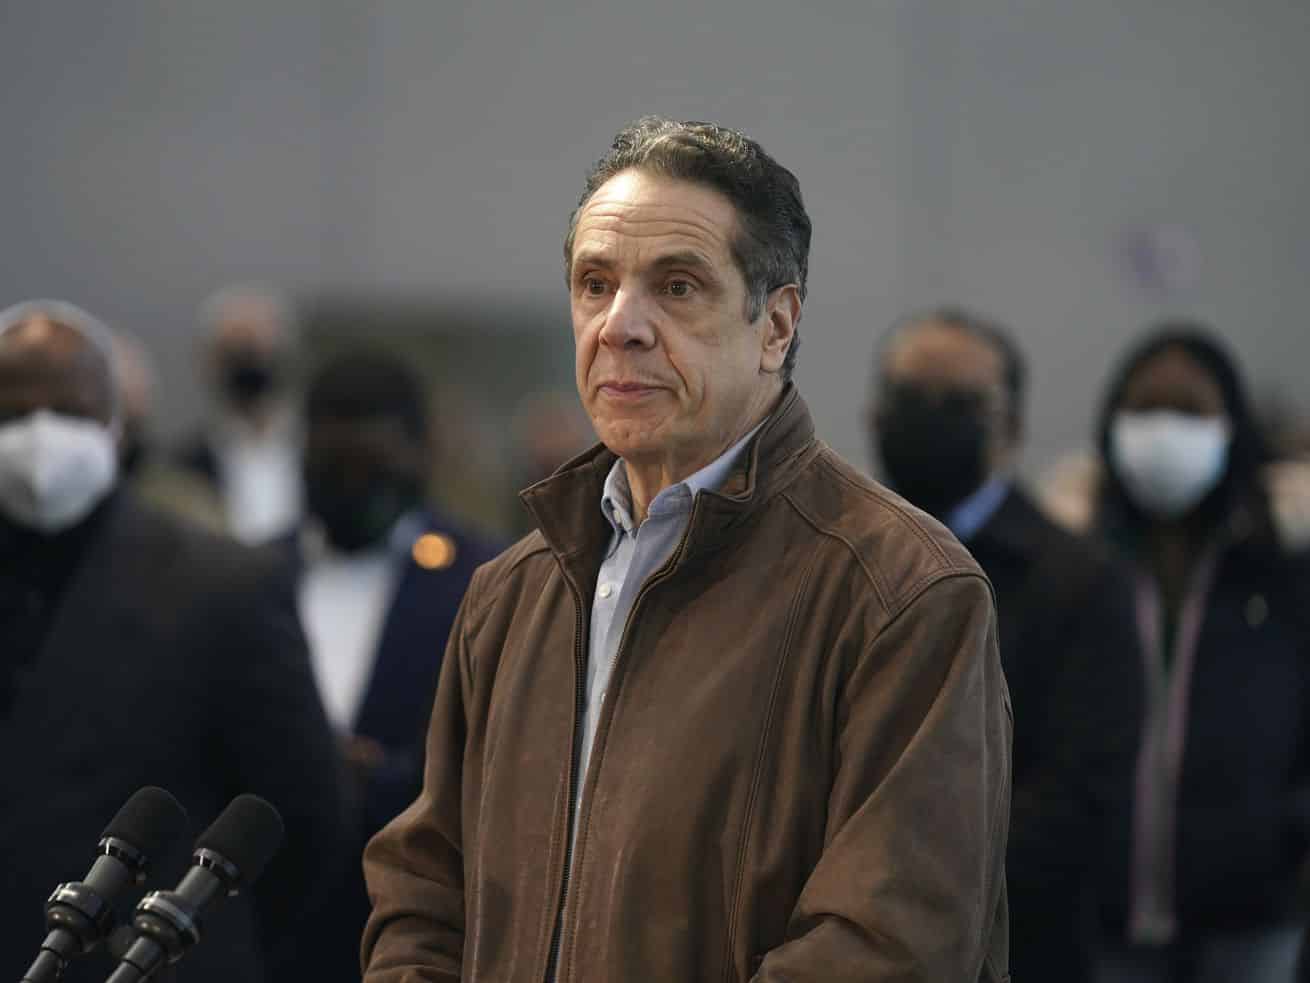 Andrew Cuomo is facing an extraordinary rebuke from his own party